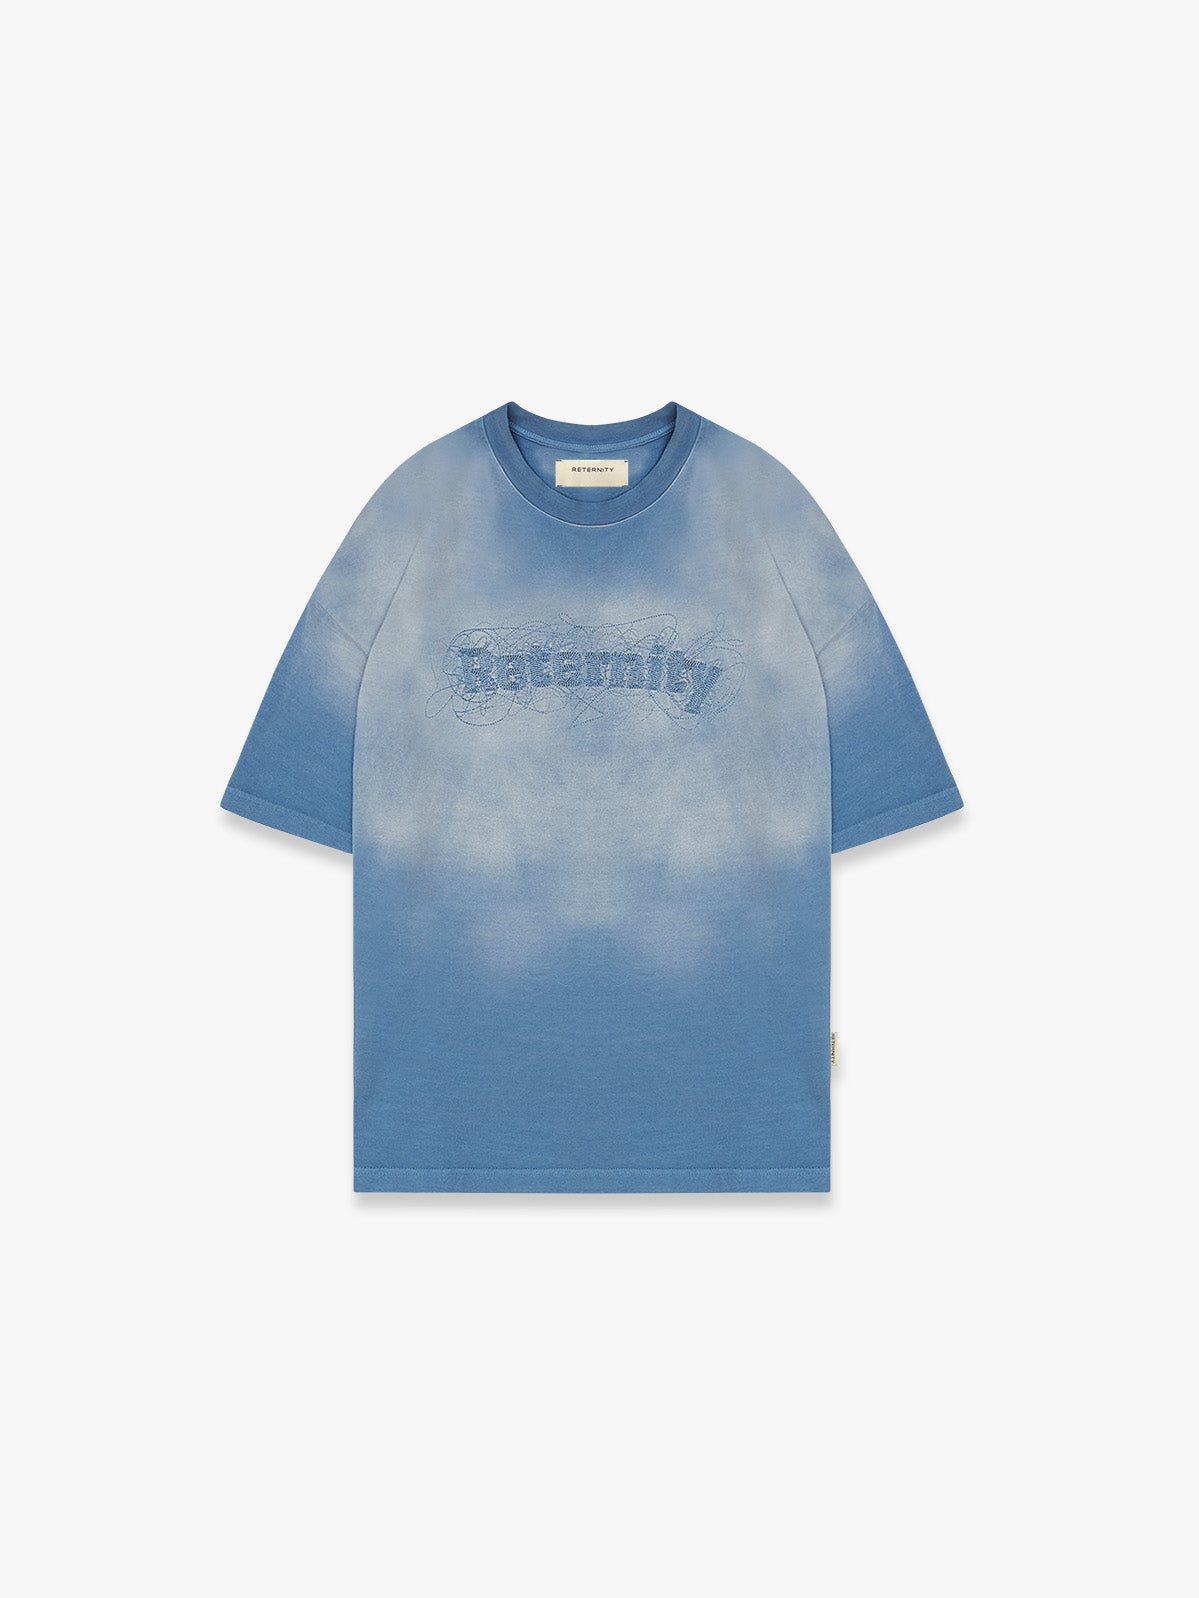 EMBROIDERED T-SHIRT - FADED BLUE-GREY